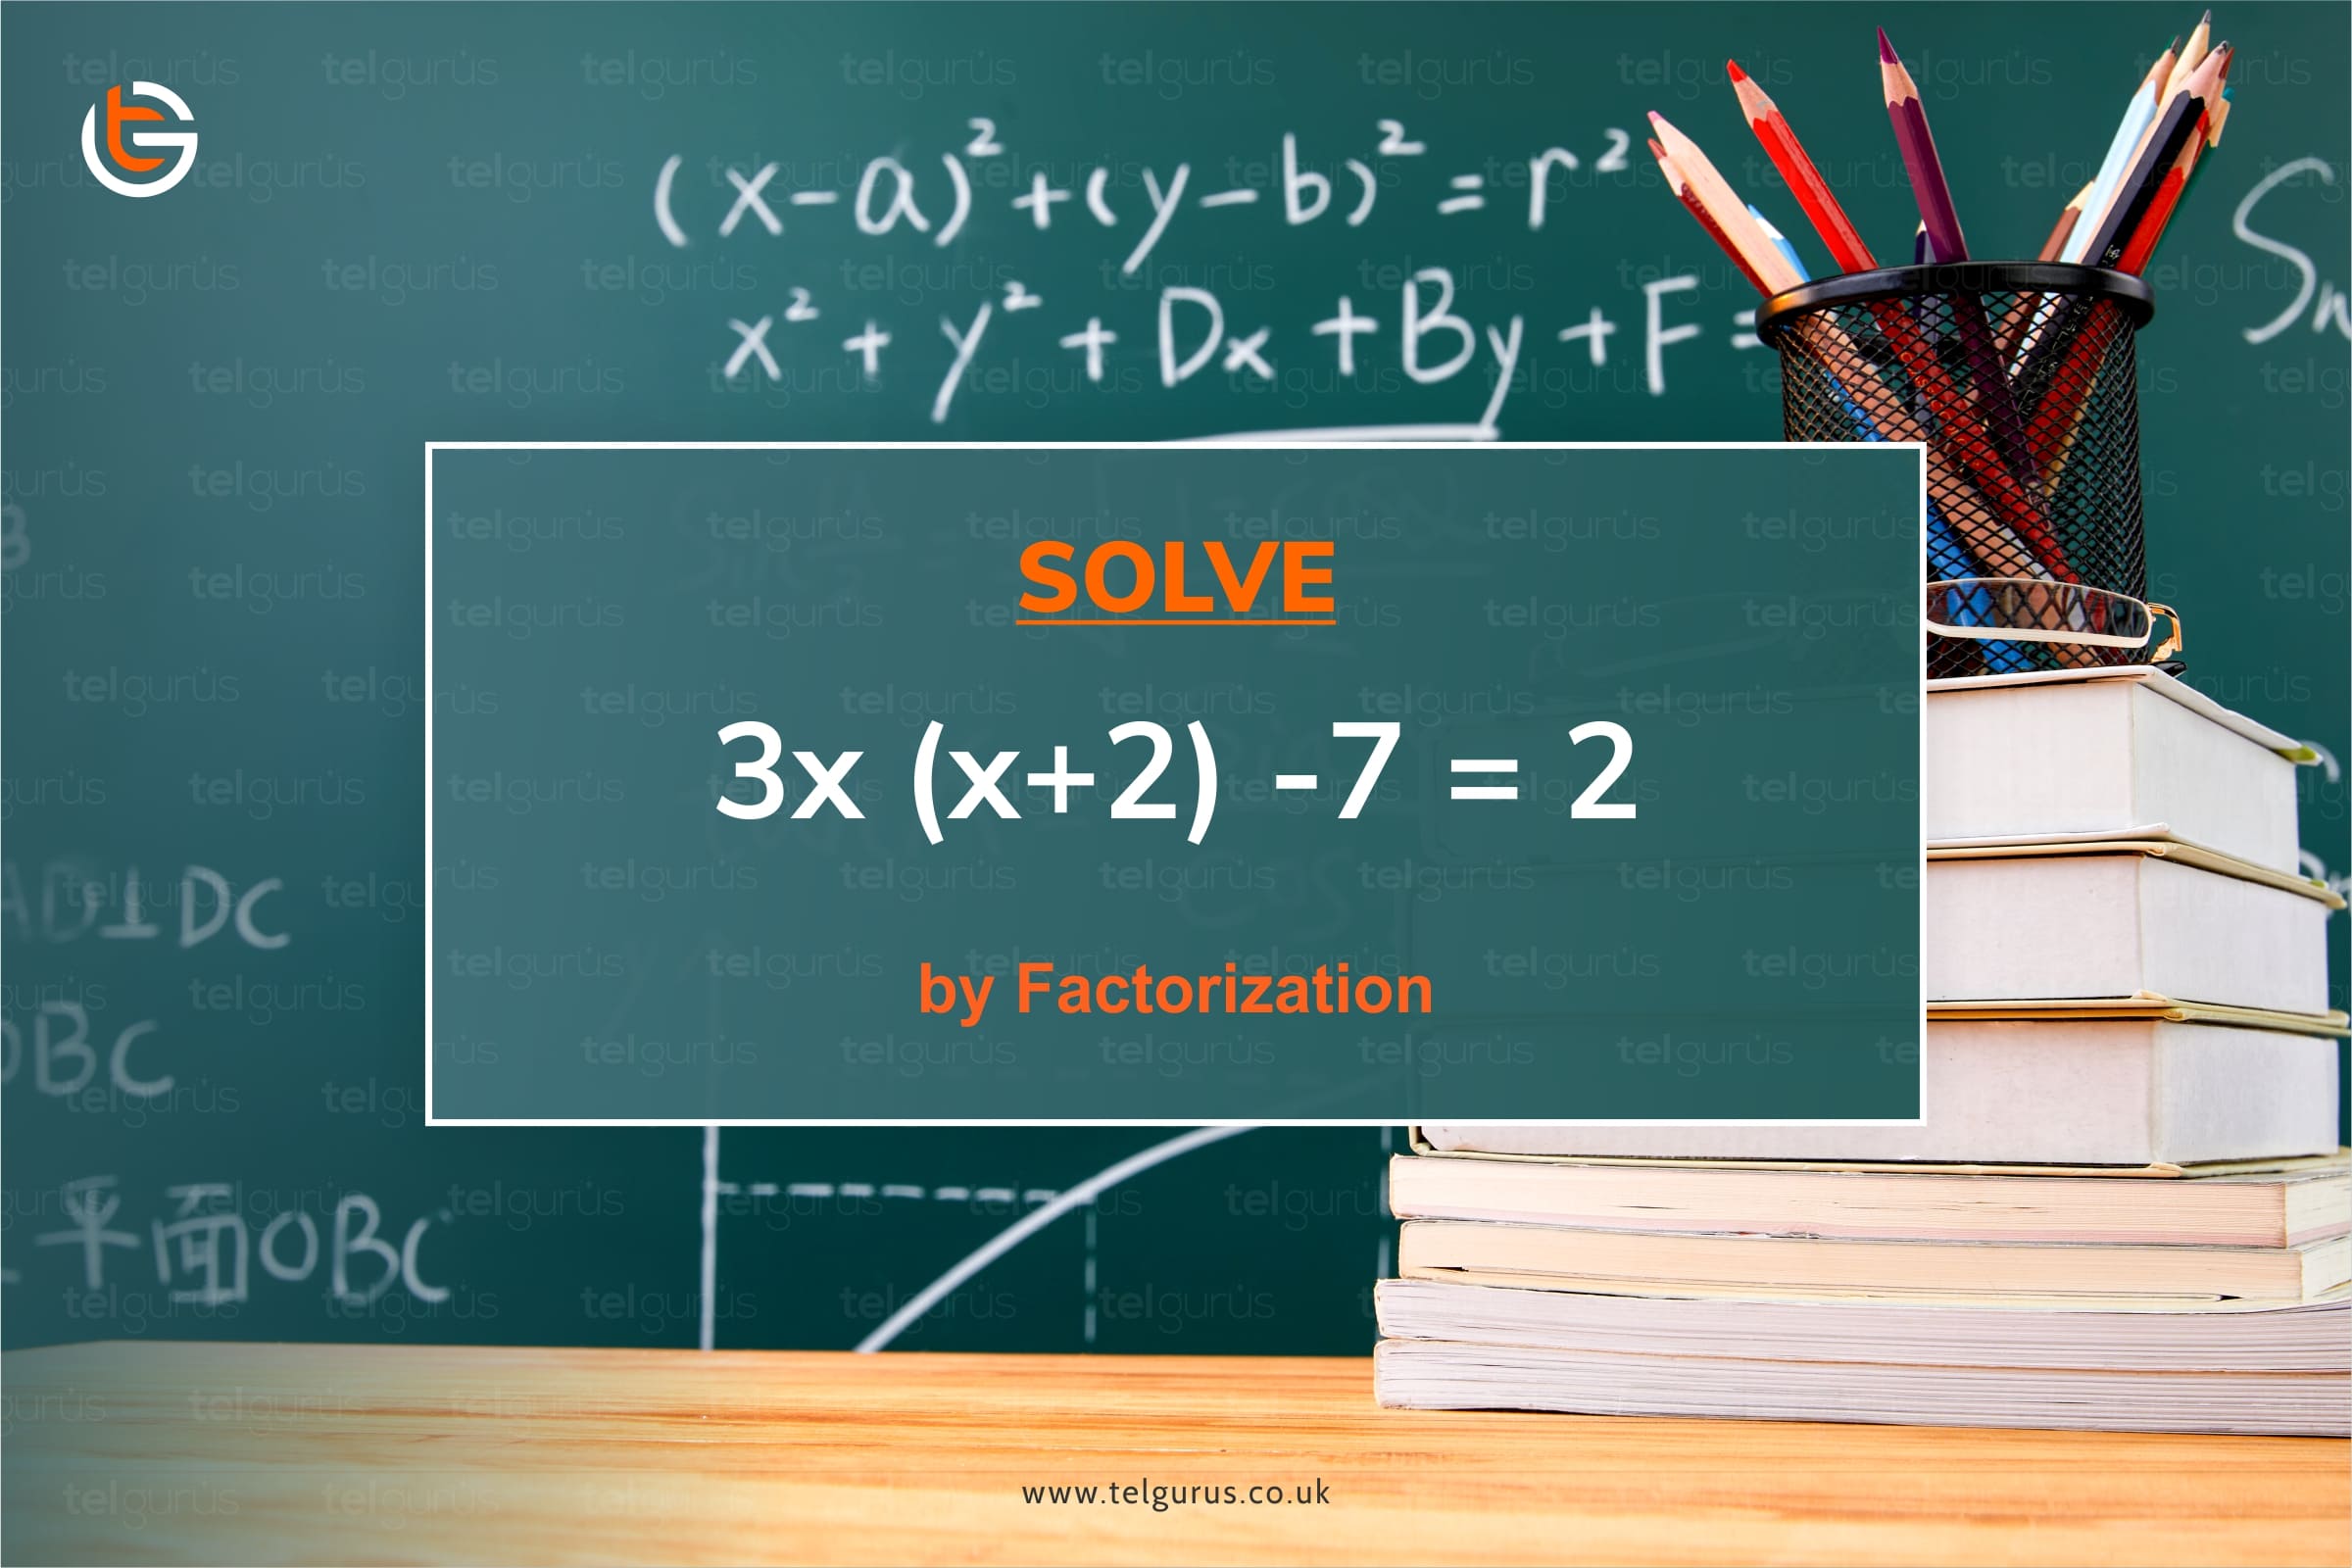 Simplify and then solve by factorization 3x ( x + 2 ) - 7 = 2 , to find x.